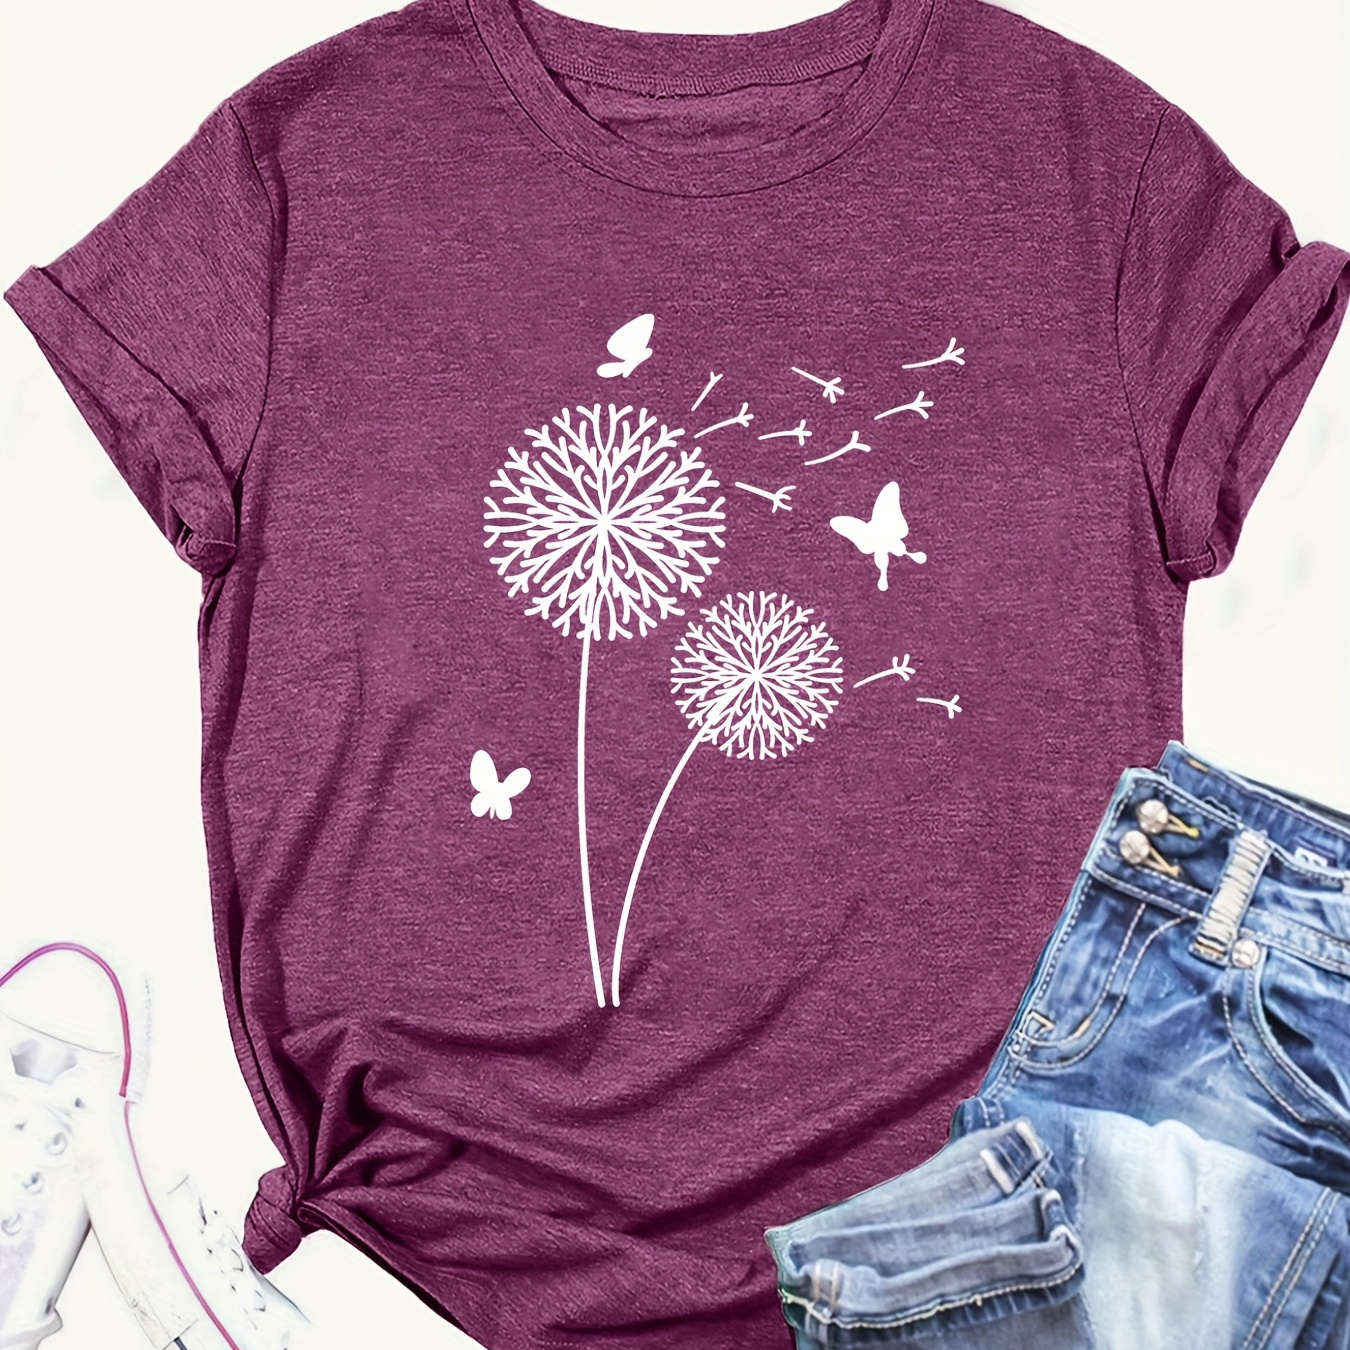 

Dandelion & Butterfly Print Casual T-shirt, Crew Neck Short Sleeve Top For Spring & Summer, Women's Clothing